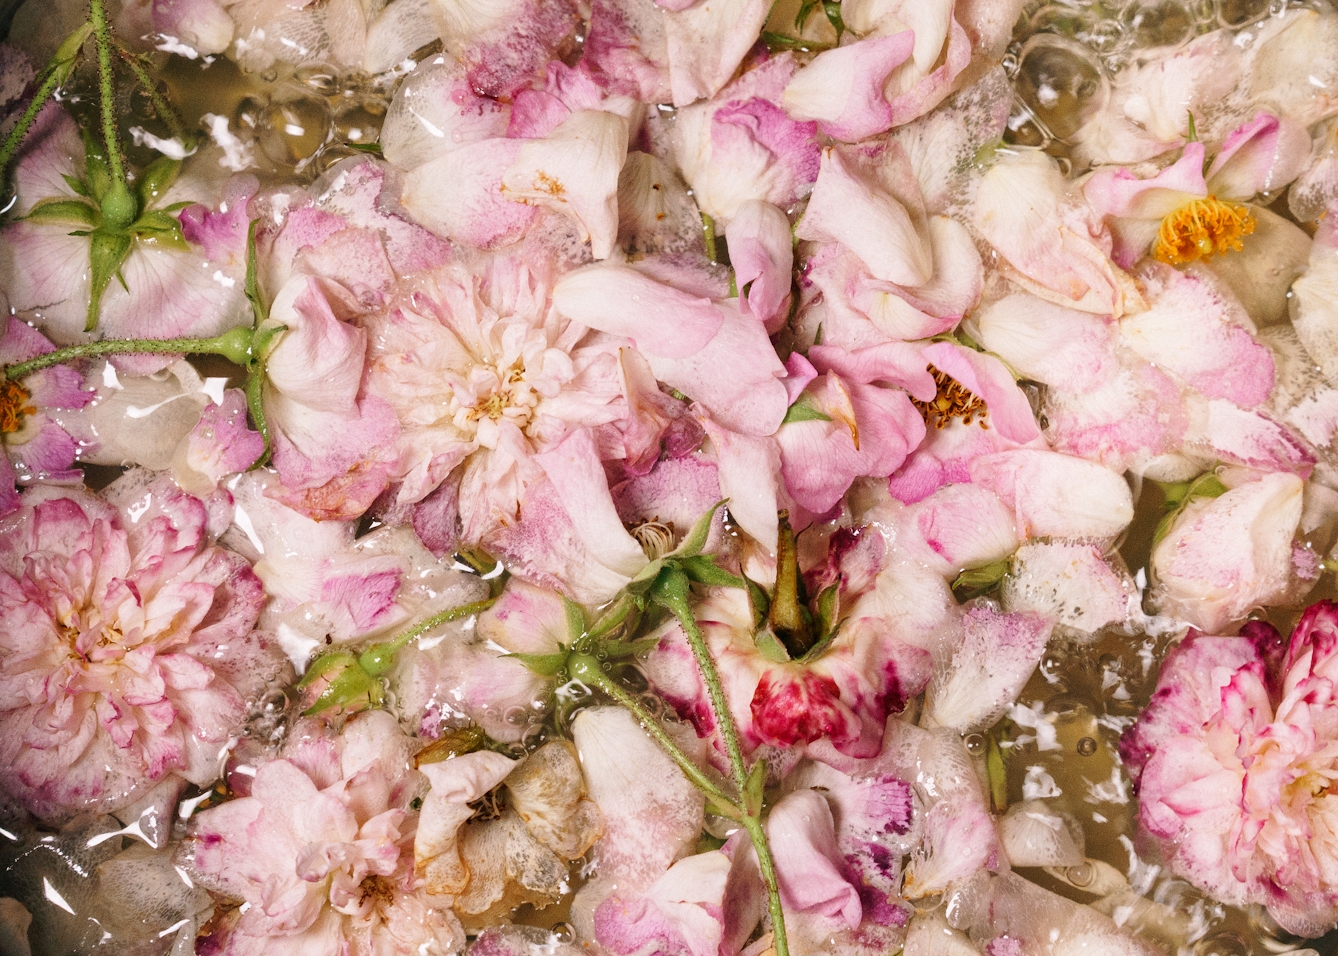 Photograph of a close-up of rose flower heads and petals floating in a water mixture. The colours are light pinks of the petals and greens of the stalks. There are bubble in on the surface of the mixture.